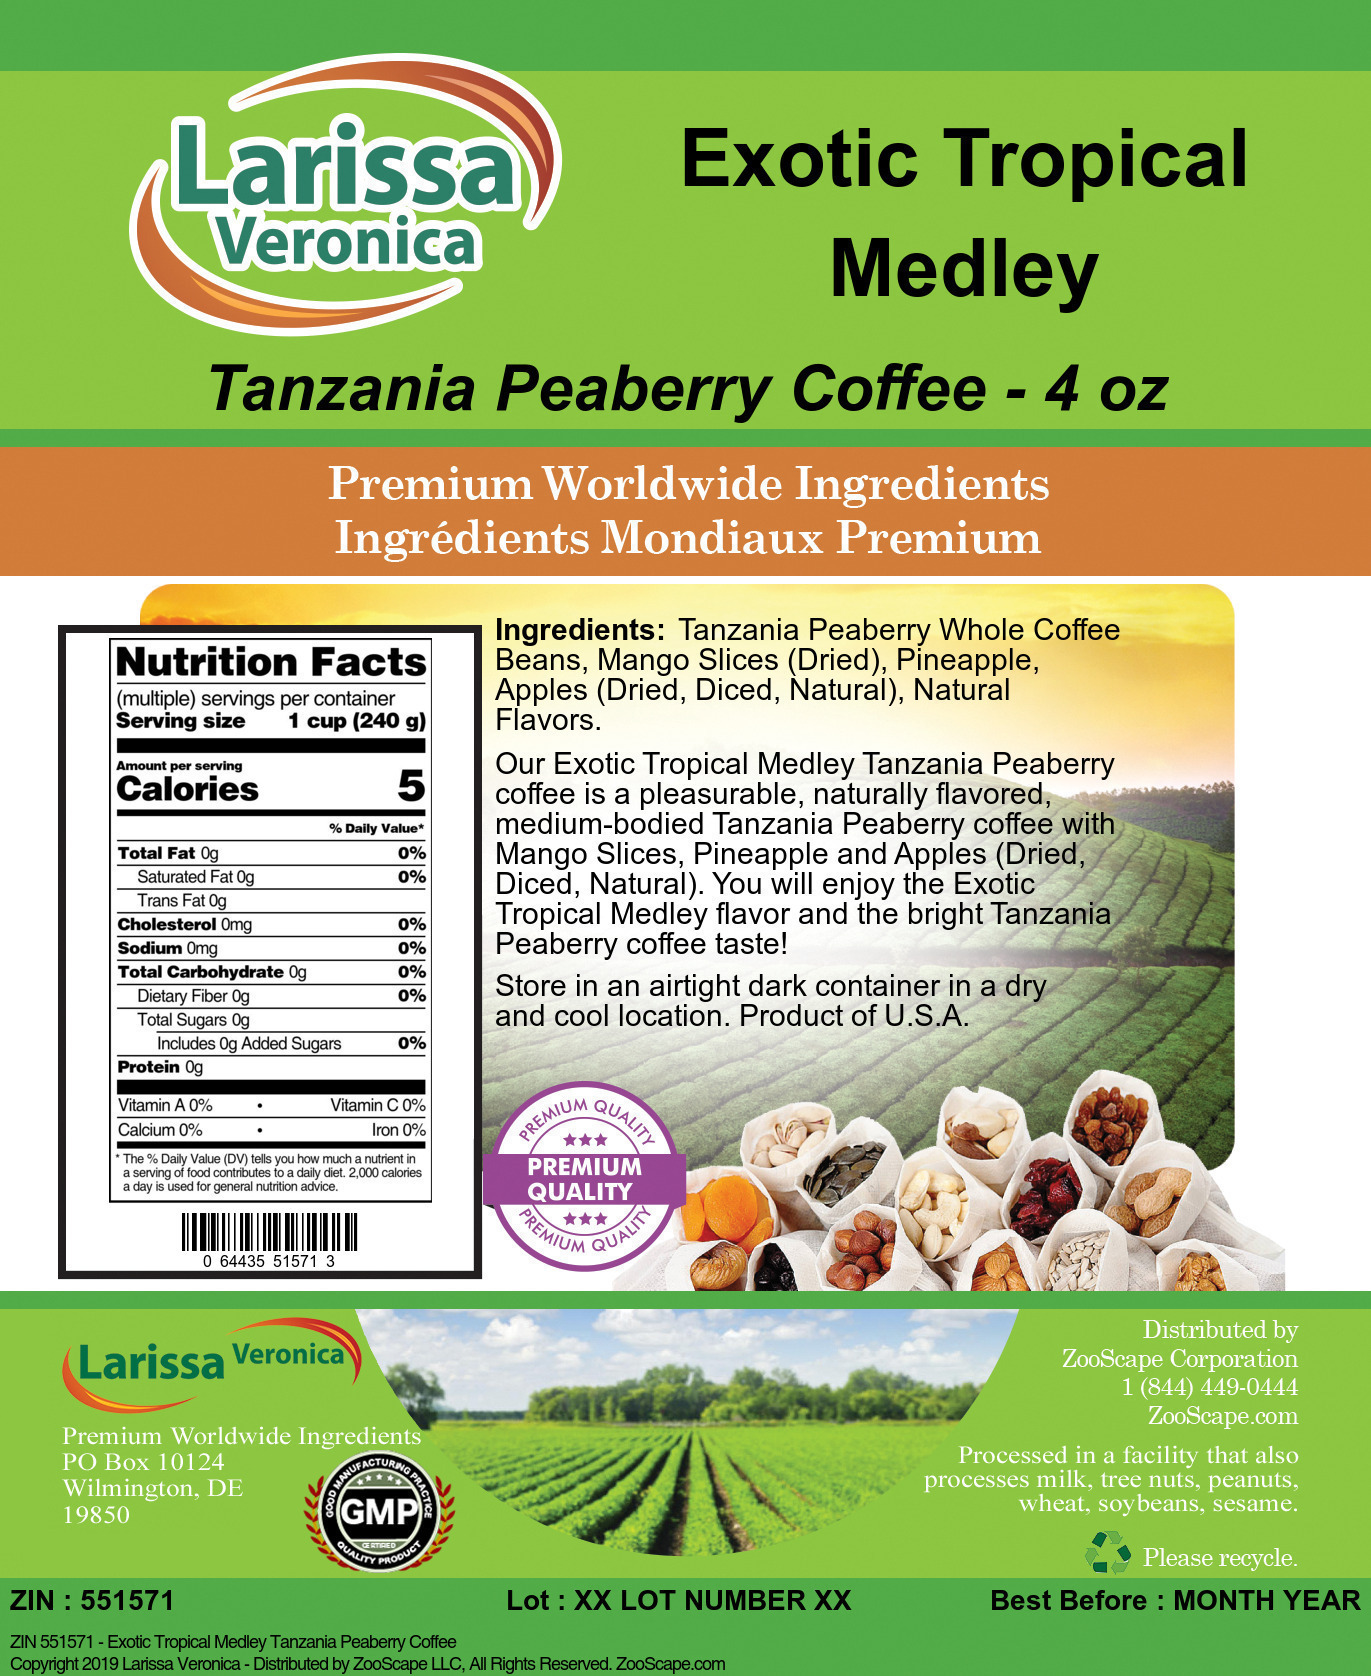 Exotic Tropical Medley Tanzania Peaberry Coffee - Label